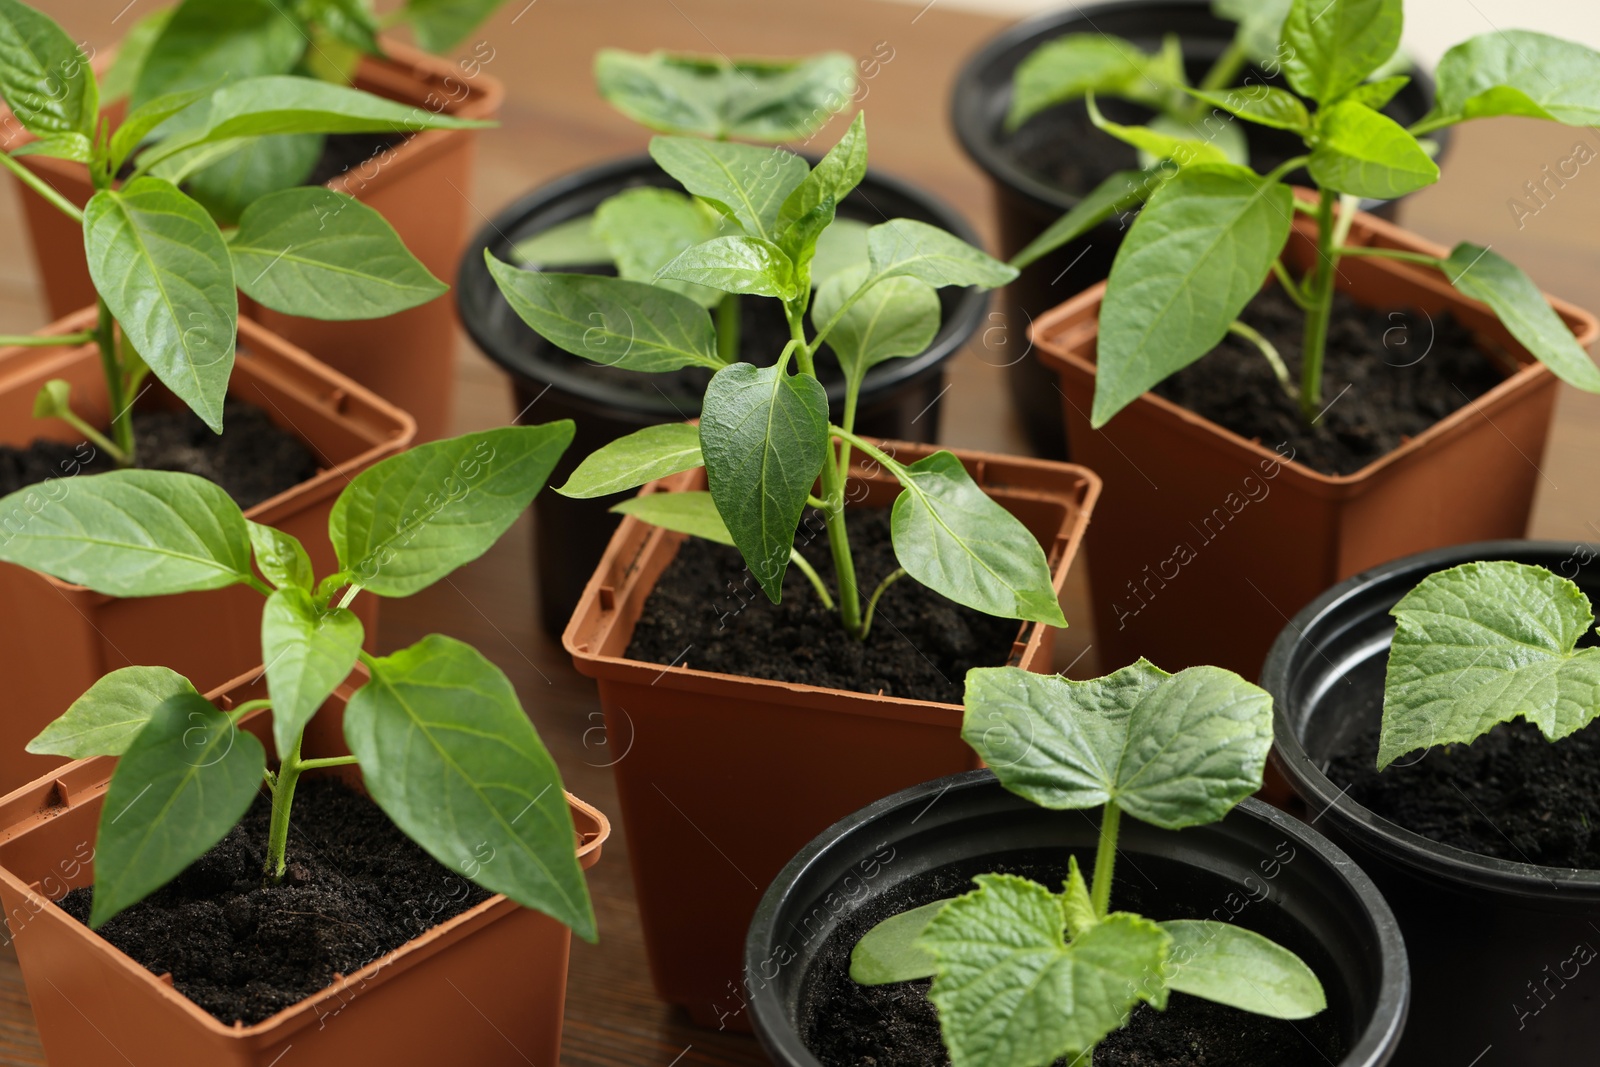 Photo of Seedlings growing in plastic containers with soil on table